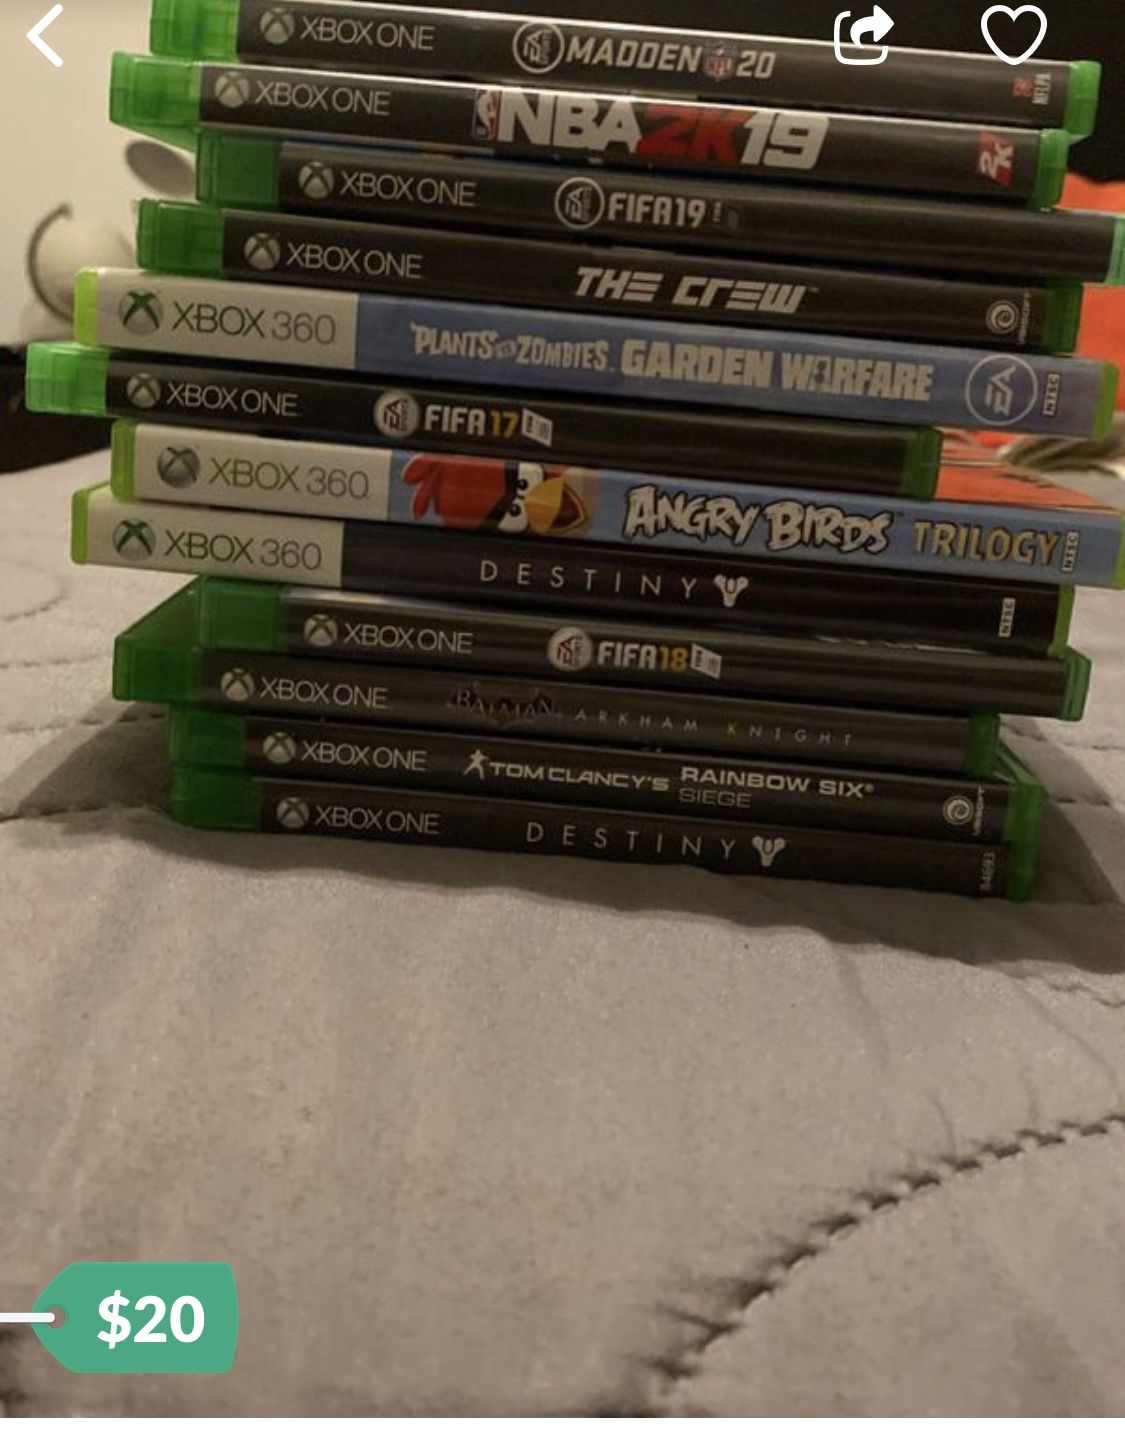 Xbox games Xbox 360 $15 and Xbox one $20